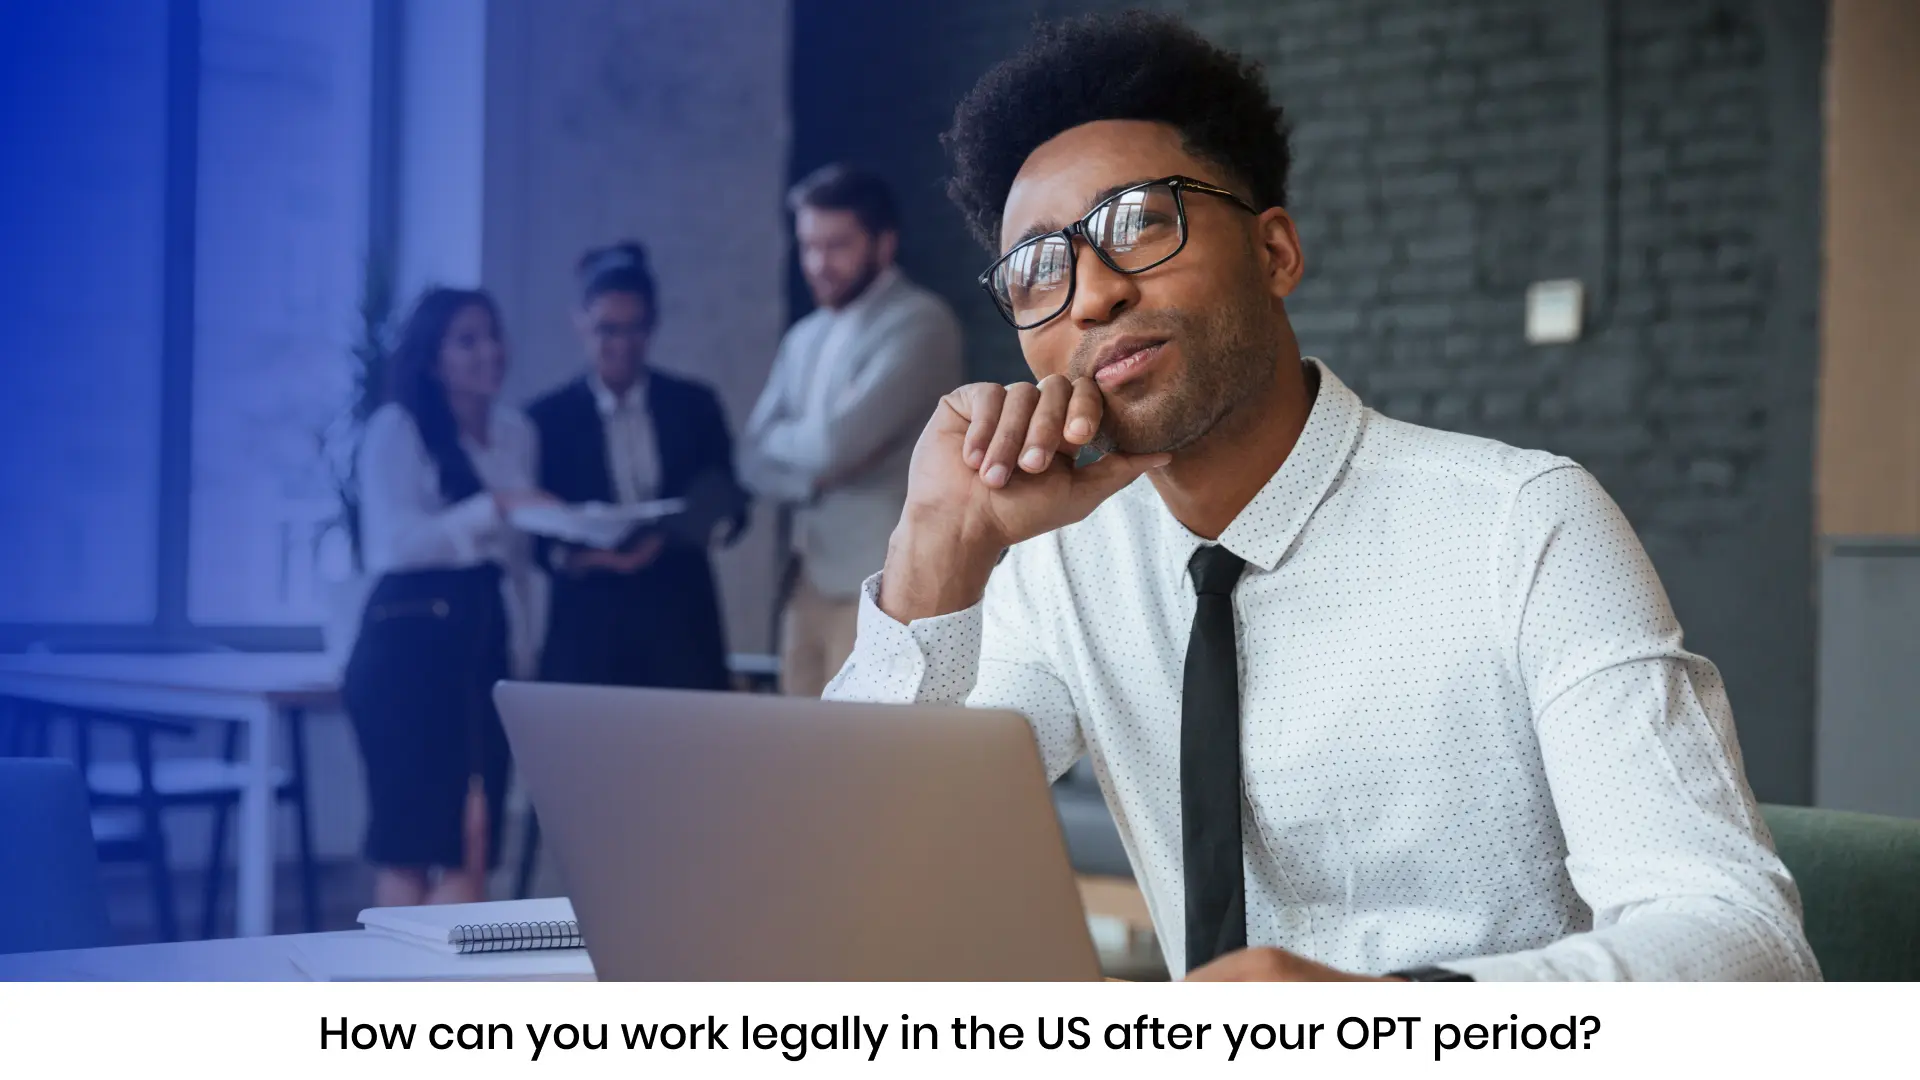 How can you work legally in the US after your OPT period?